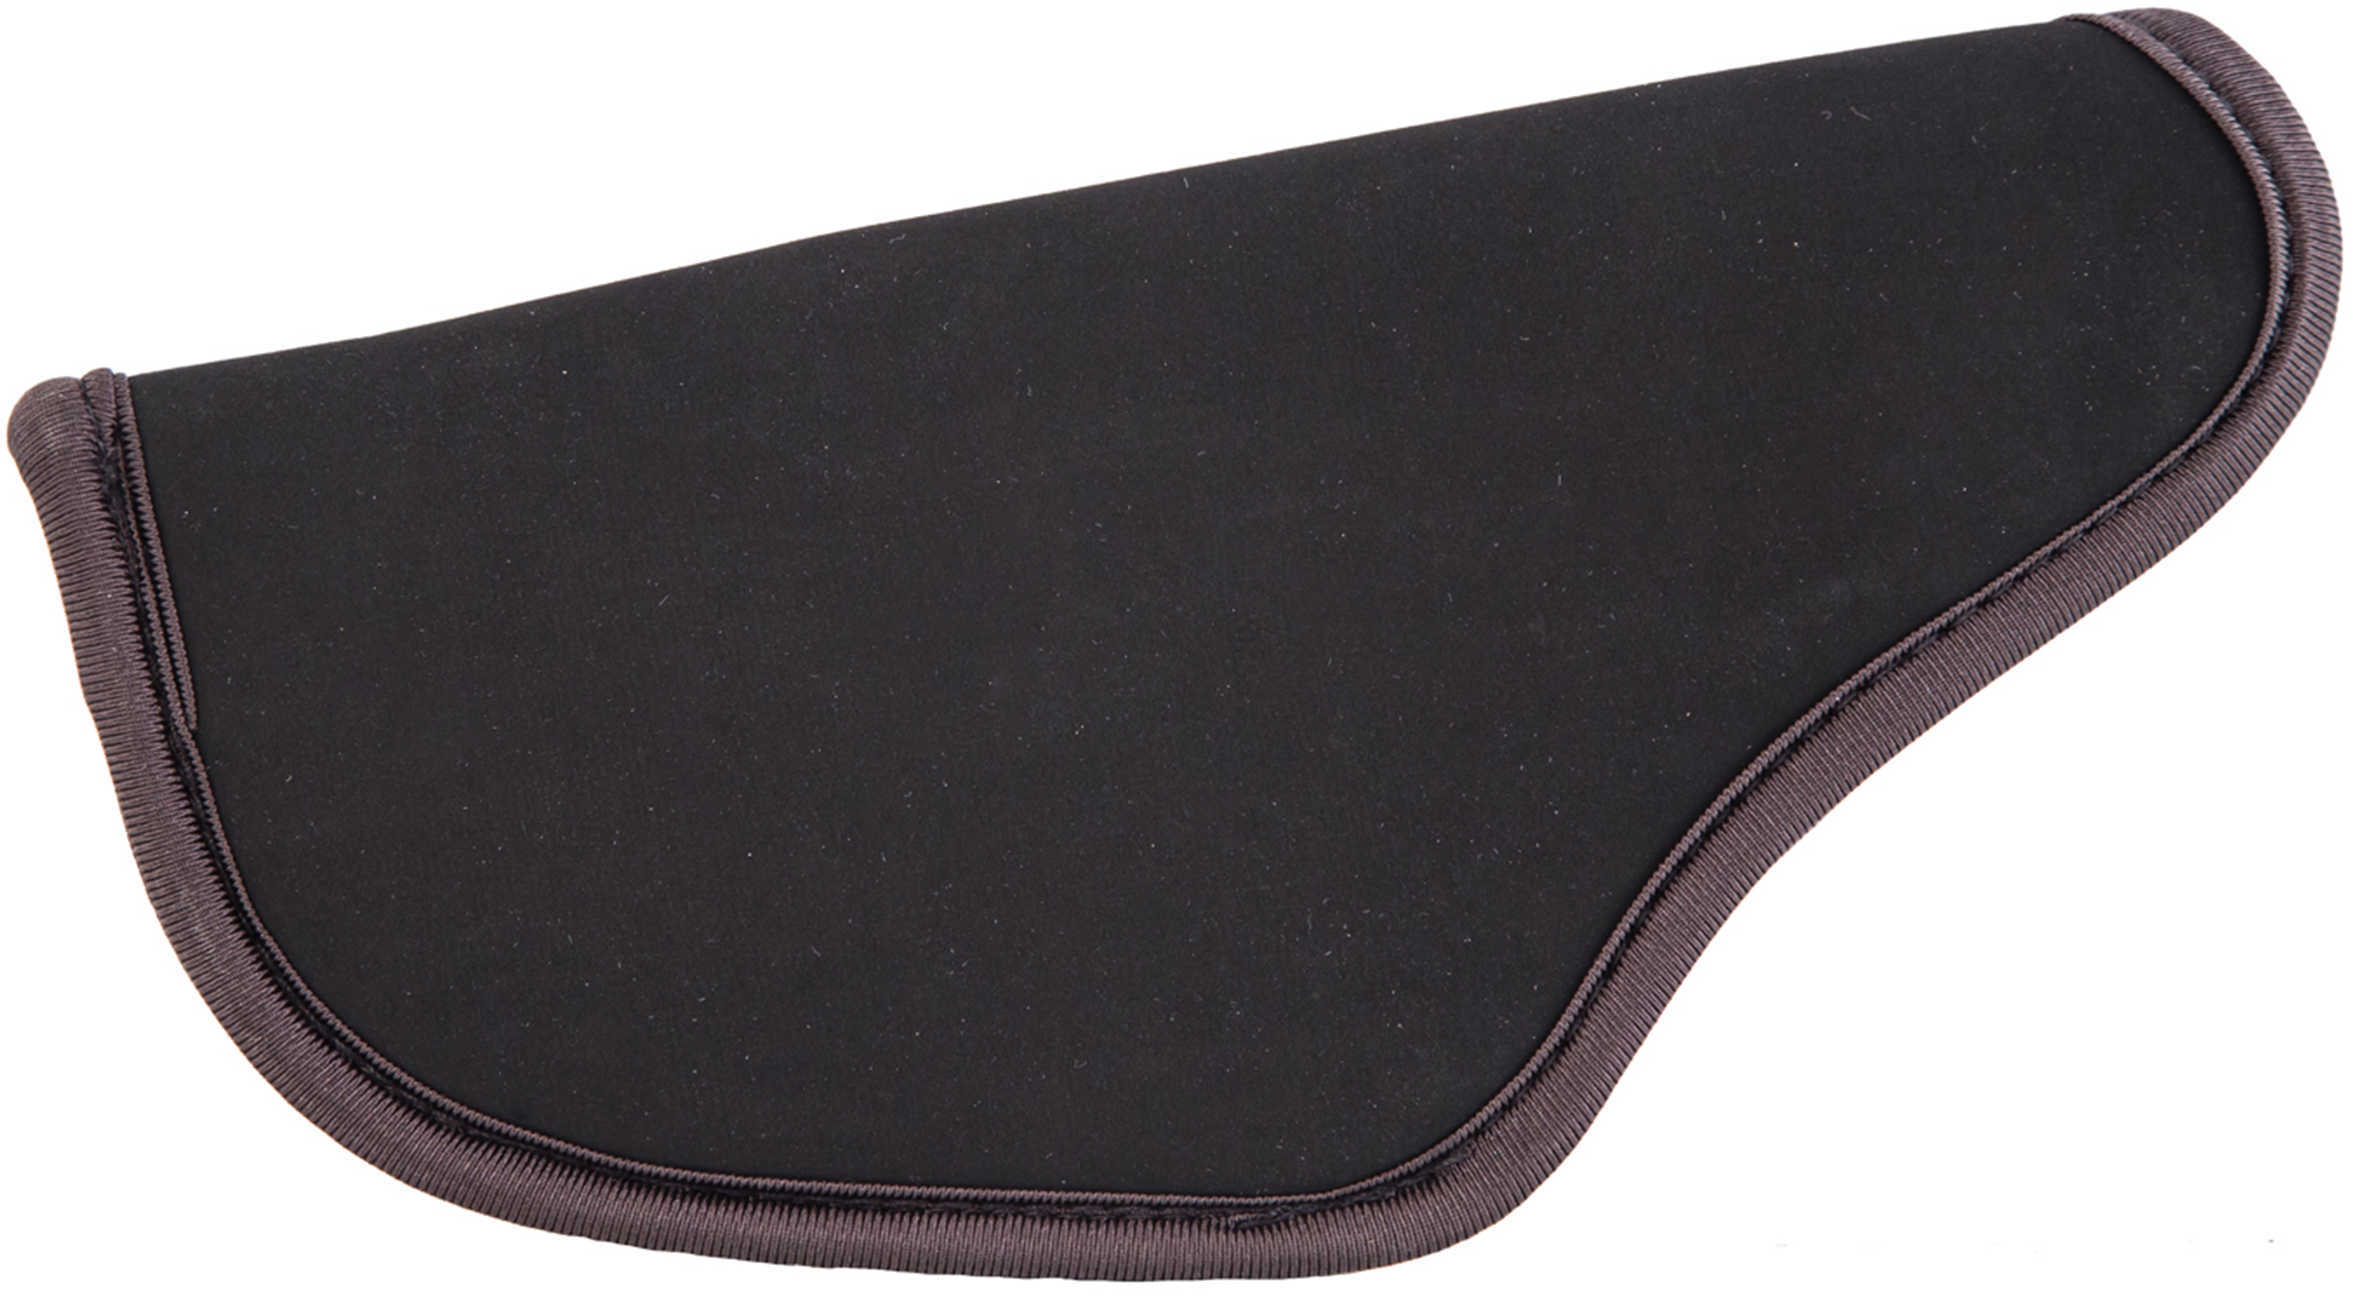 Caldwell Tac Ops IWB Covert Holster 4 1/2" - 5" Large Semi Autos, Right Hand, Black Md: 110084